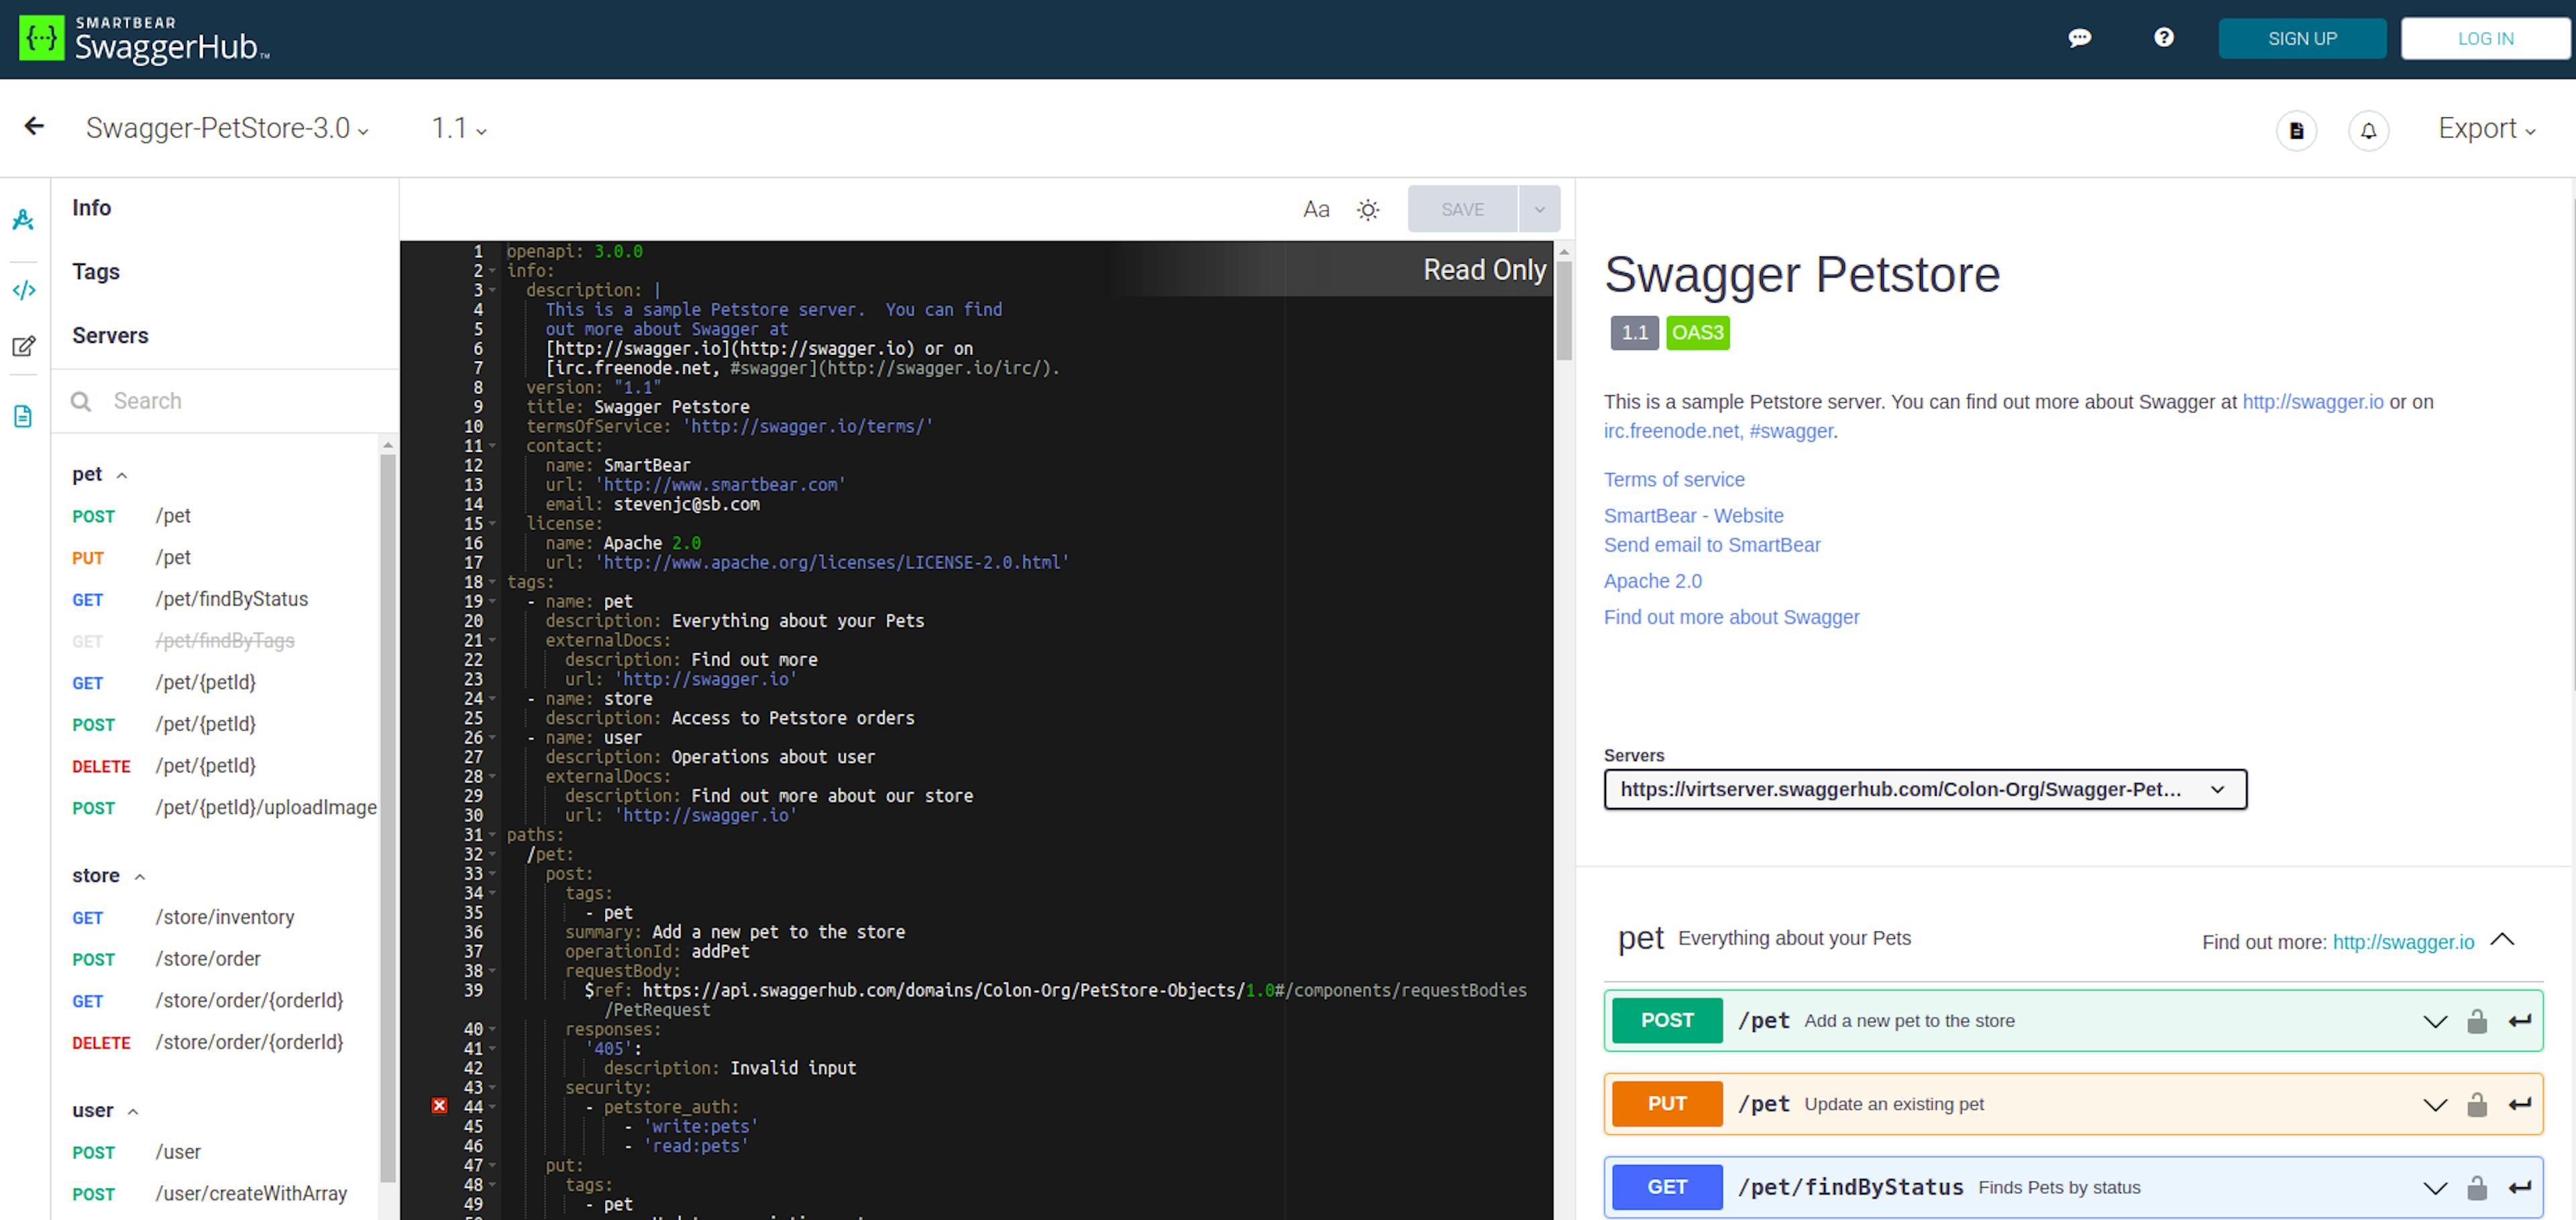 The “Swagger Petstore” is the “Hello World” for OpenAPI Specifications (source)